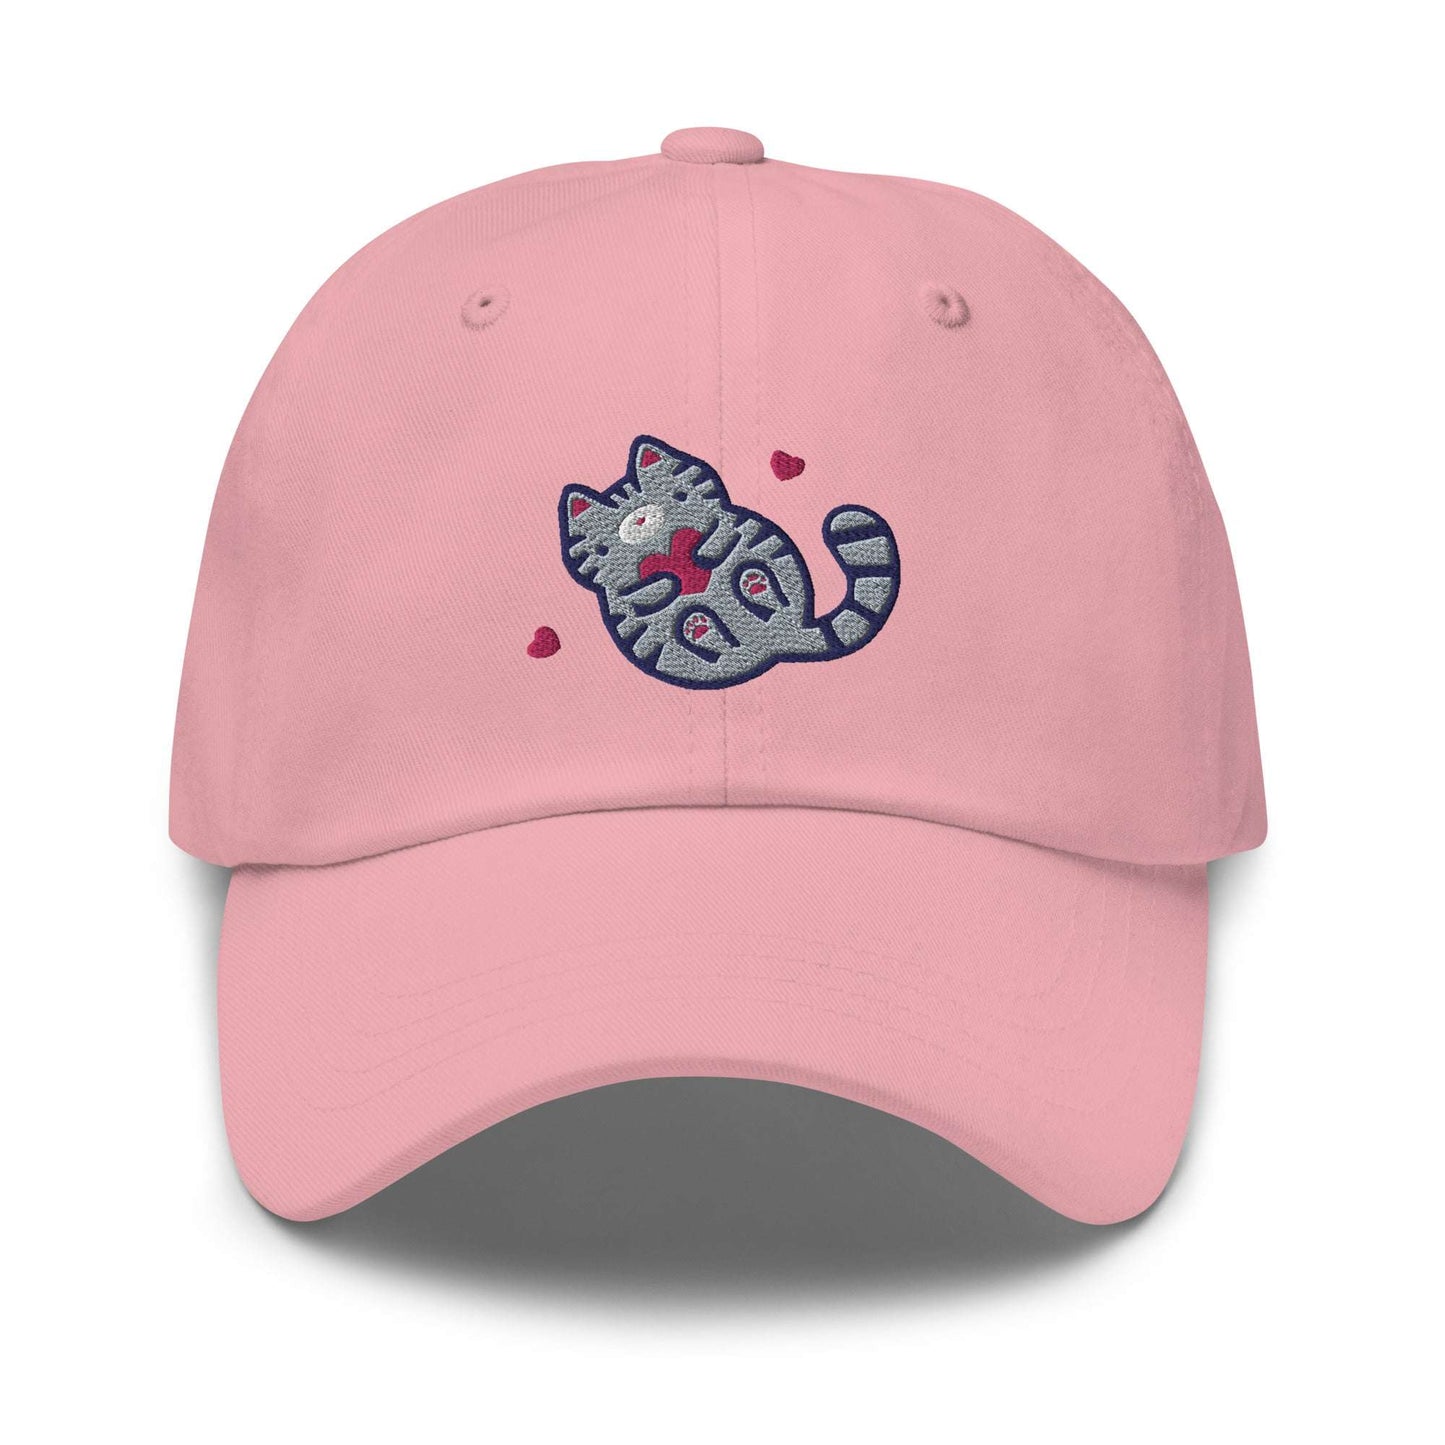 Embroidered Grey Tabby Cat Baseball Cap: Pink